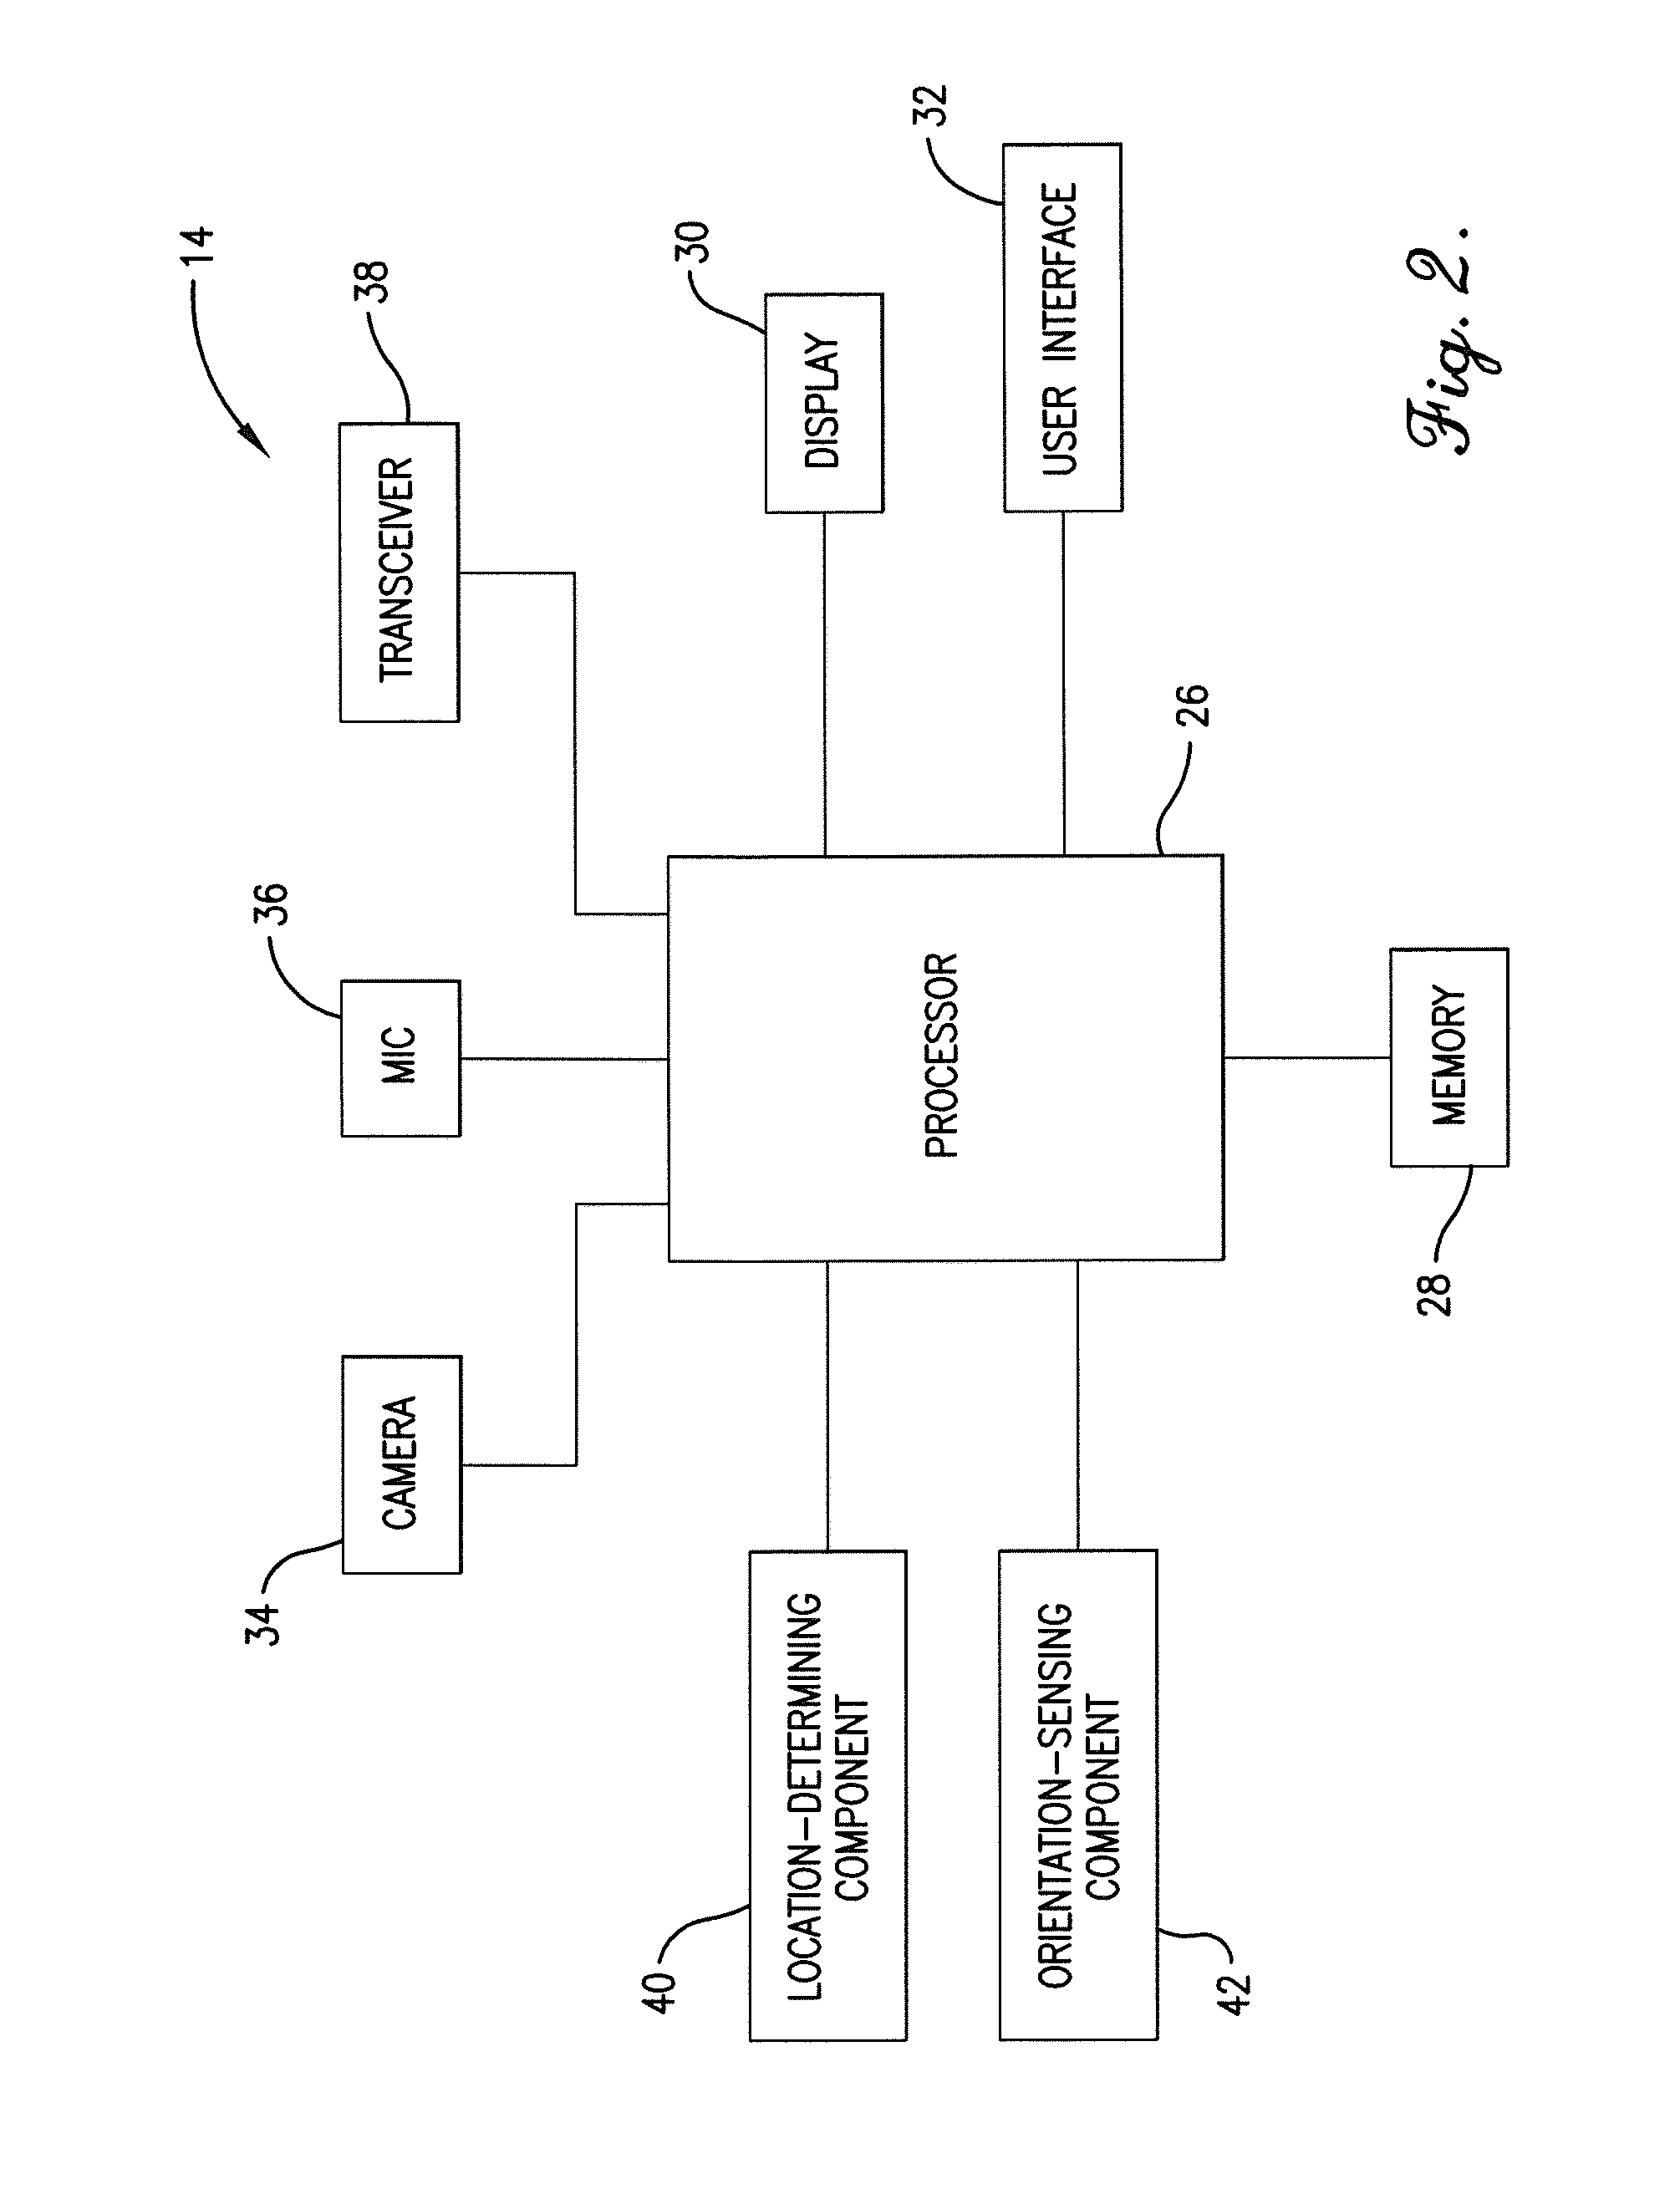 System and Method for Remote Veterinary Image Analysis and Consultation